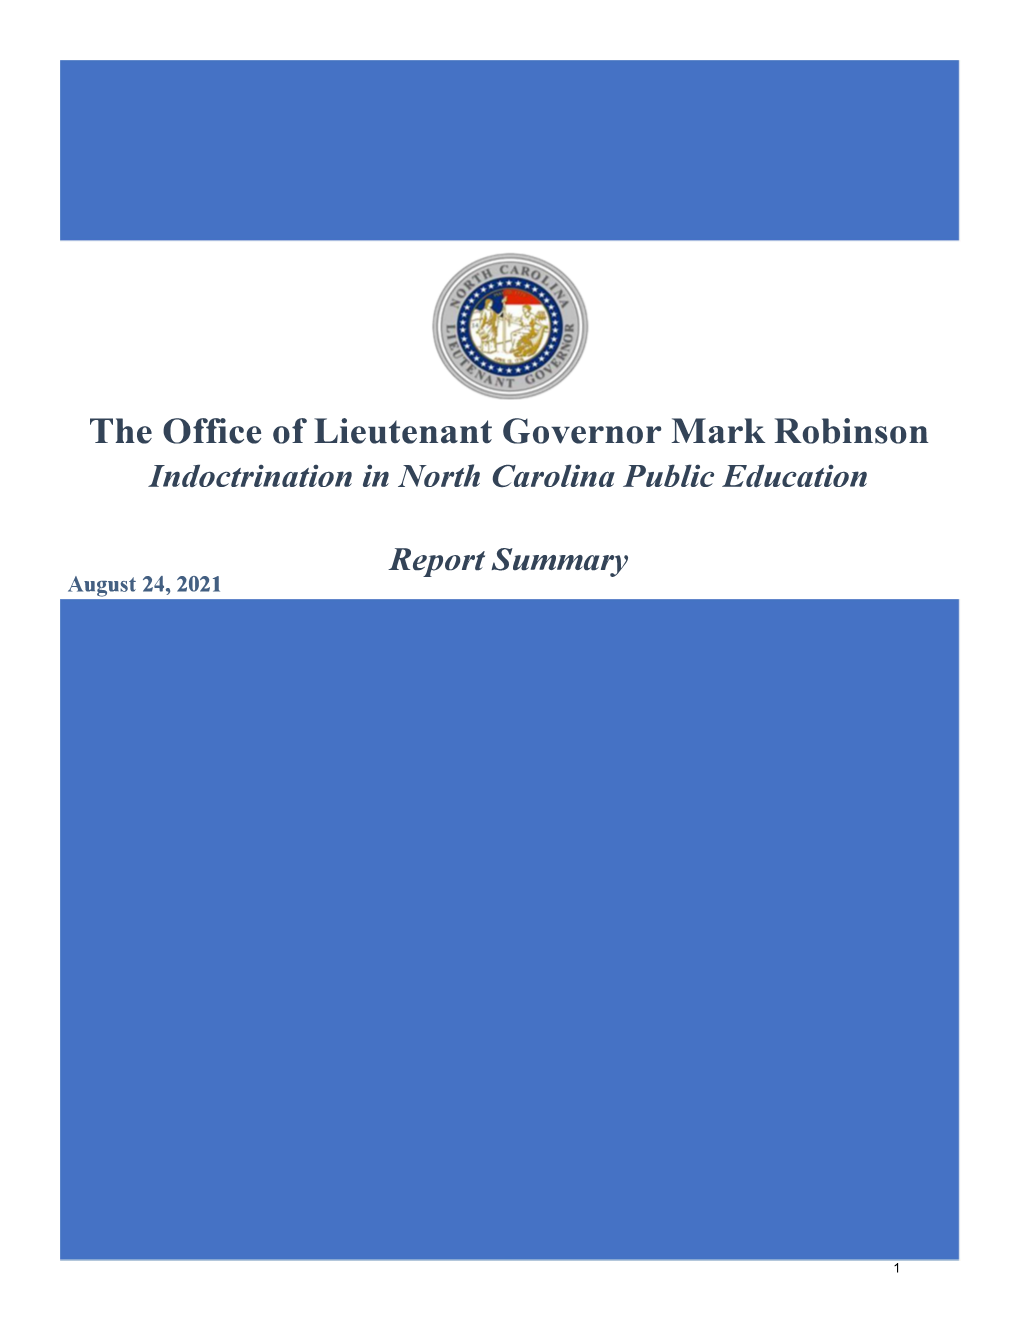 The Office of Lieutenant Governor Mark Robinson Indoctrination in North Carolina Public Education